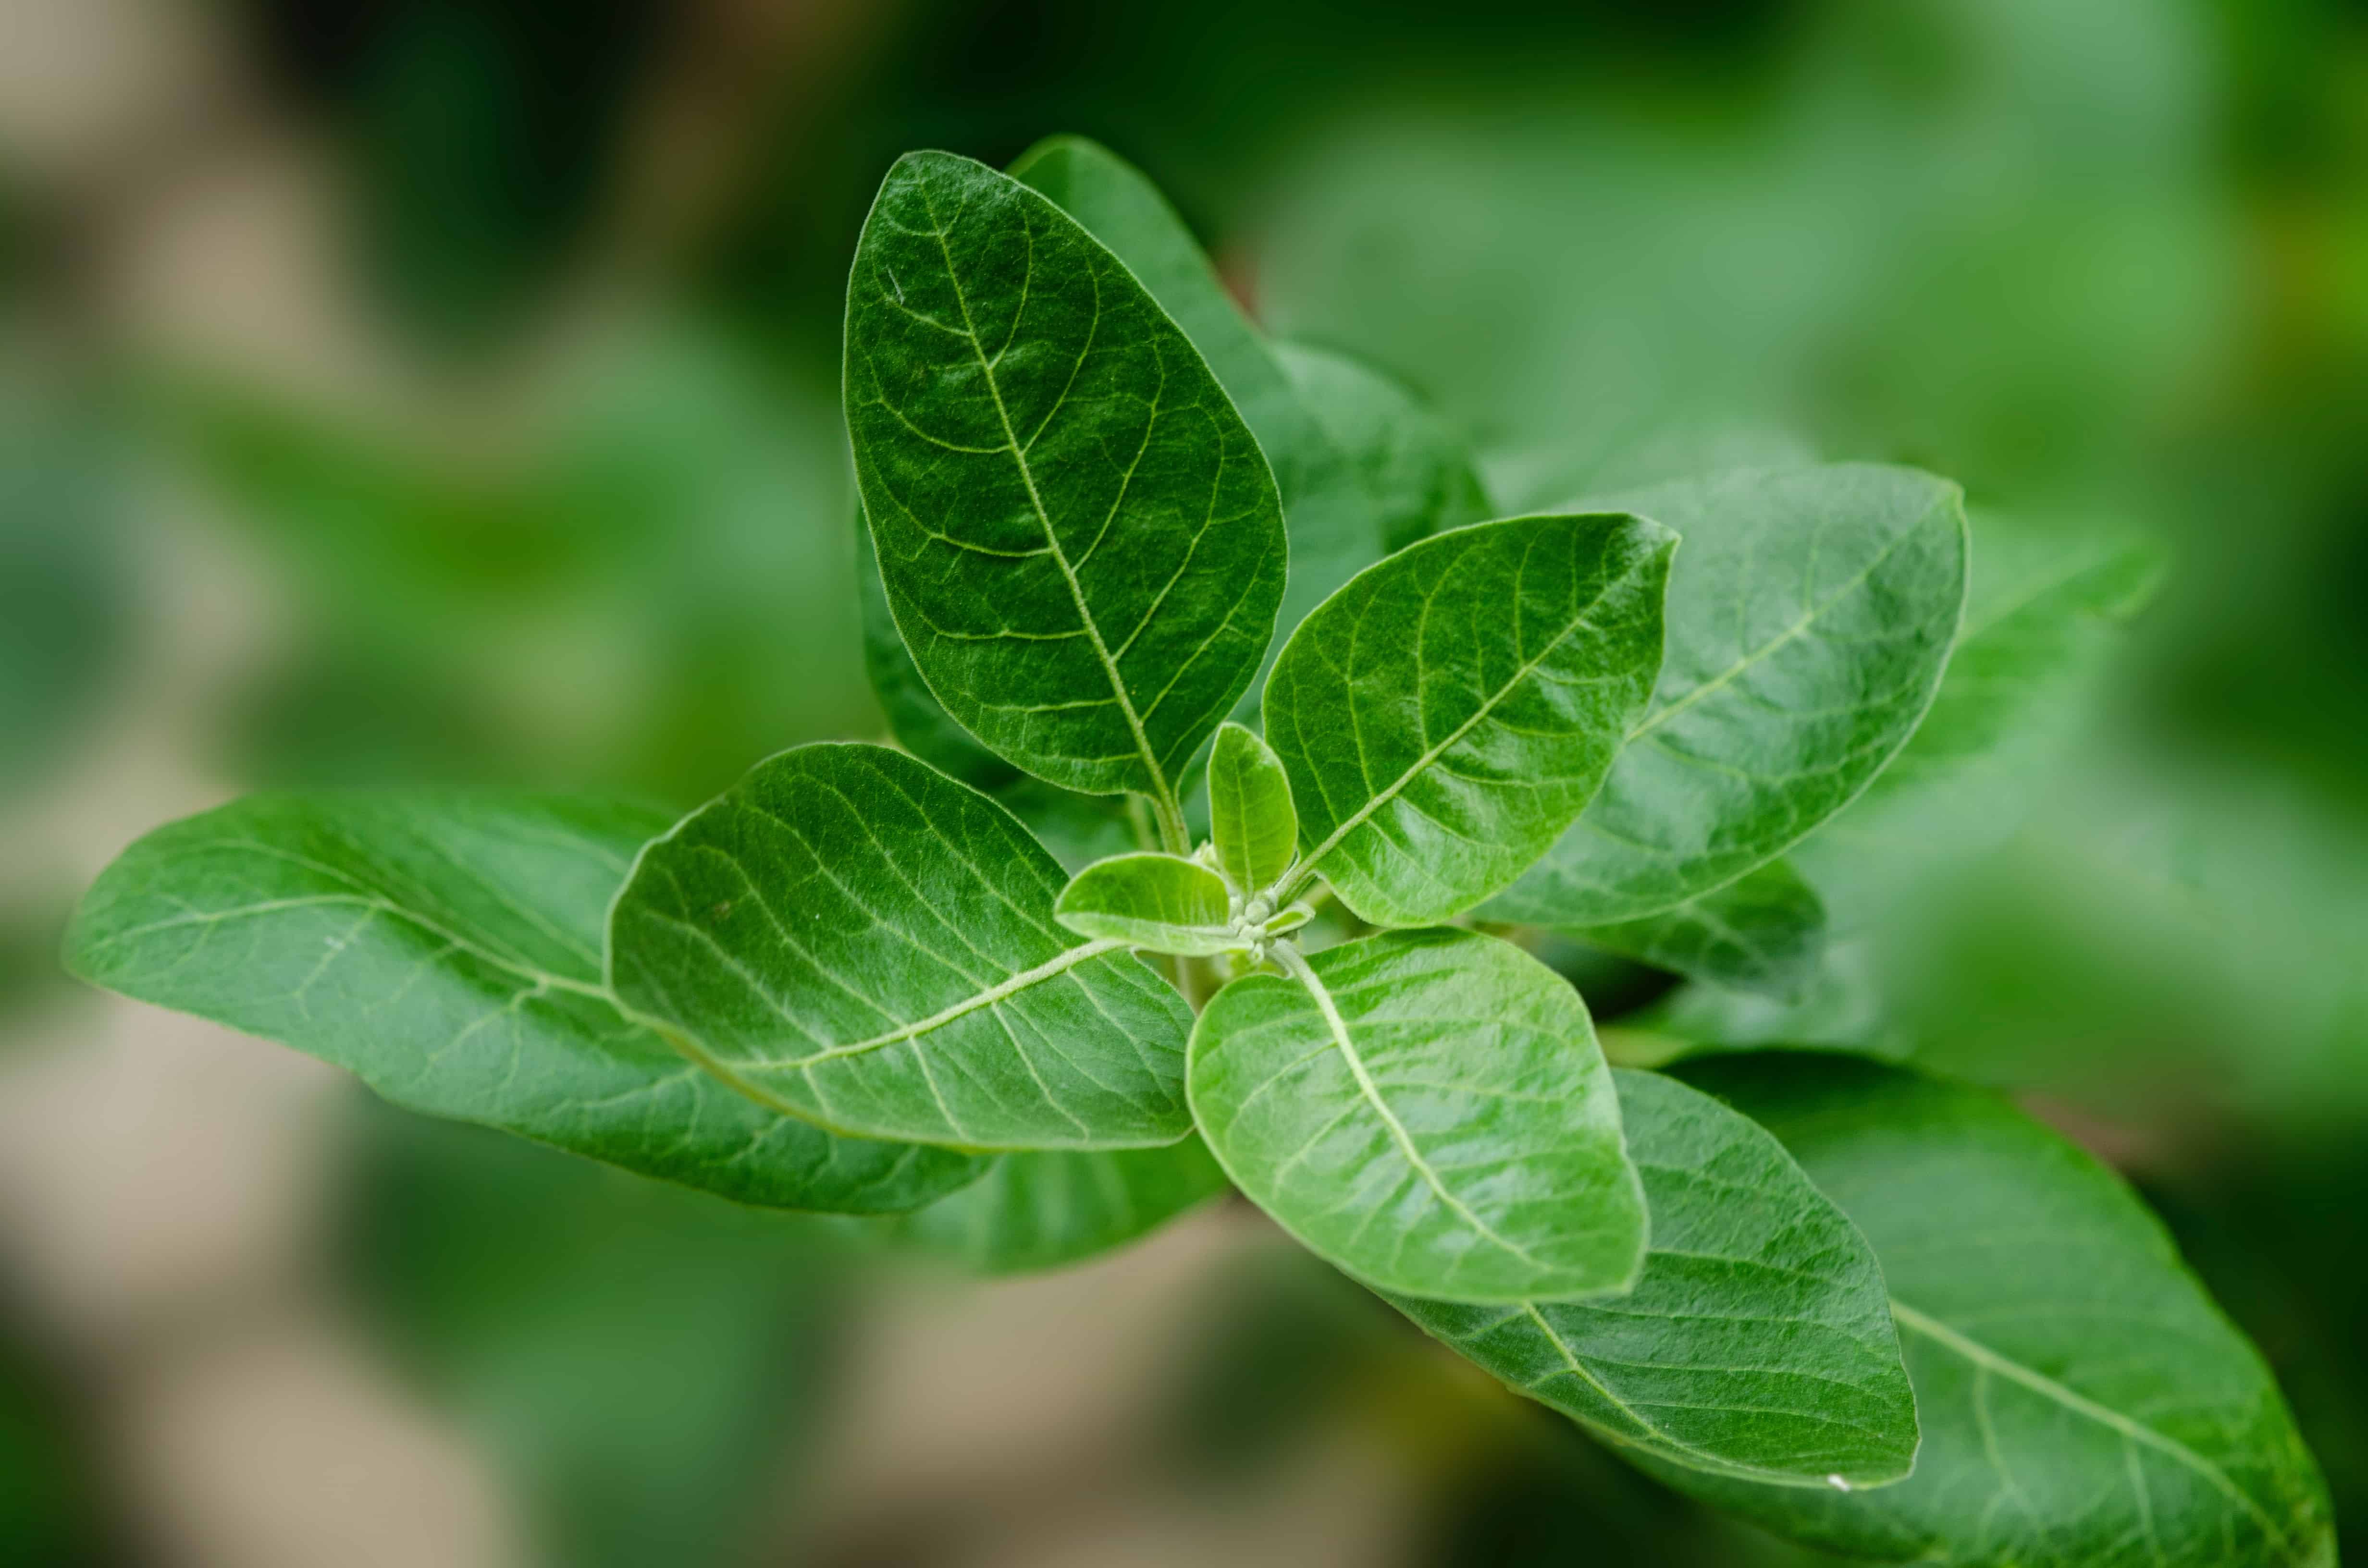 Ashwagandha: Health Benefits, How To Use, Dosage, Side Effects & Safety